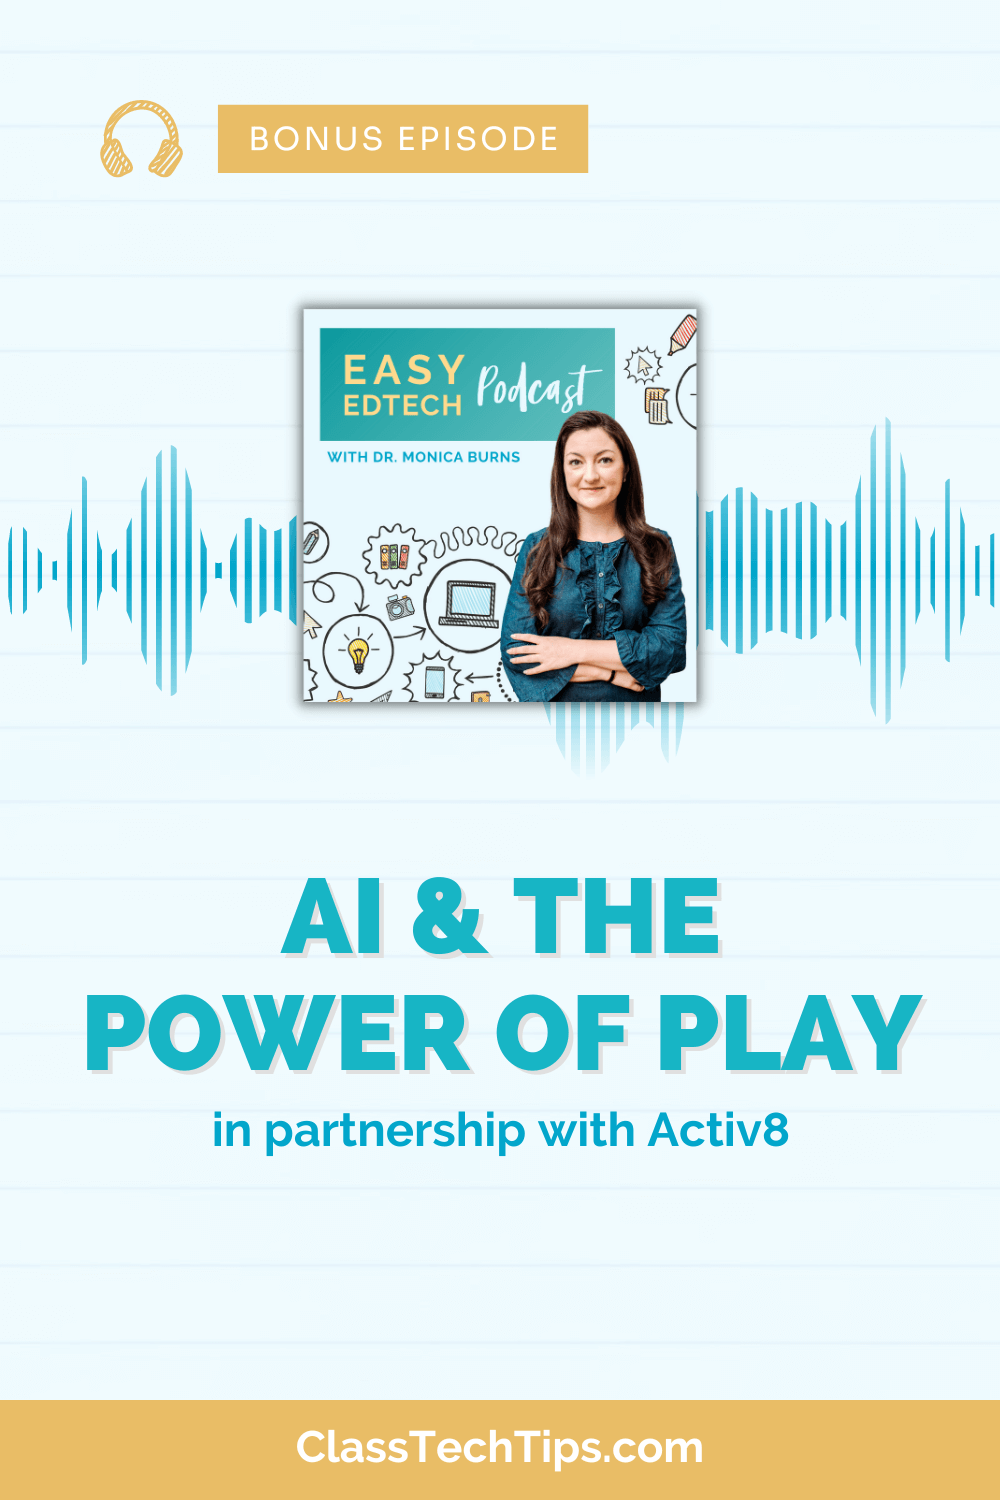 Bonus episode announcement for Easy EdTech Podcast by Dr. Monica Burns, discussing artificial intelligence and play, in partnership with Activ8, with visual elements indicating audio content at ClassTechTips.com.